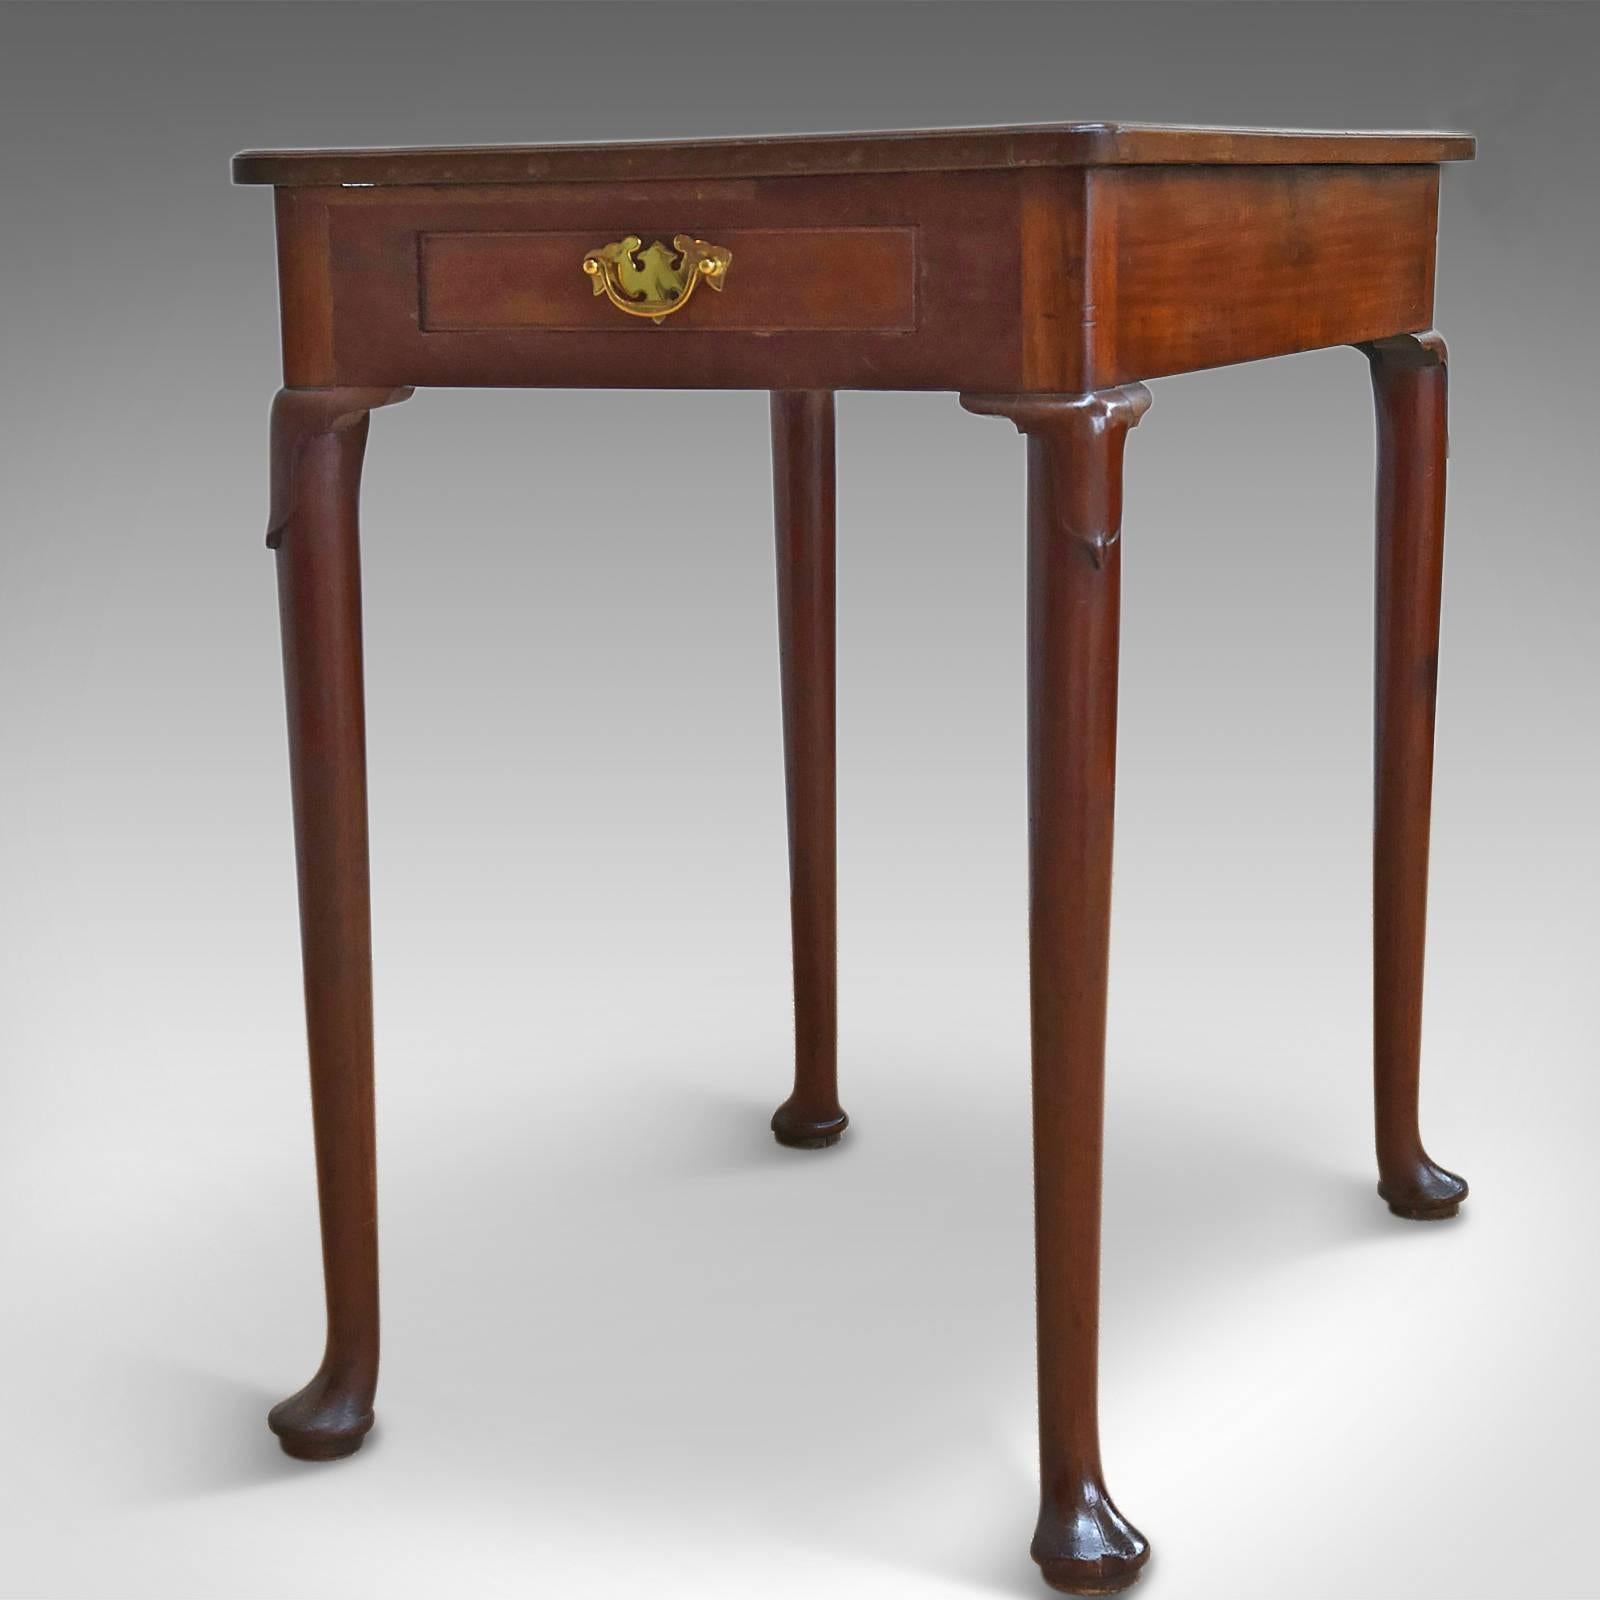 This is an antique side table dating to the early Georgian period, circa 1750.

English walnut with good color and grain interest
Simple moulded edge detail to the top and a desirable aged patina
Raised on slender, tapered legs
Drape carving to